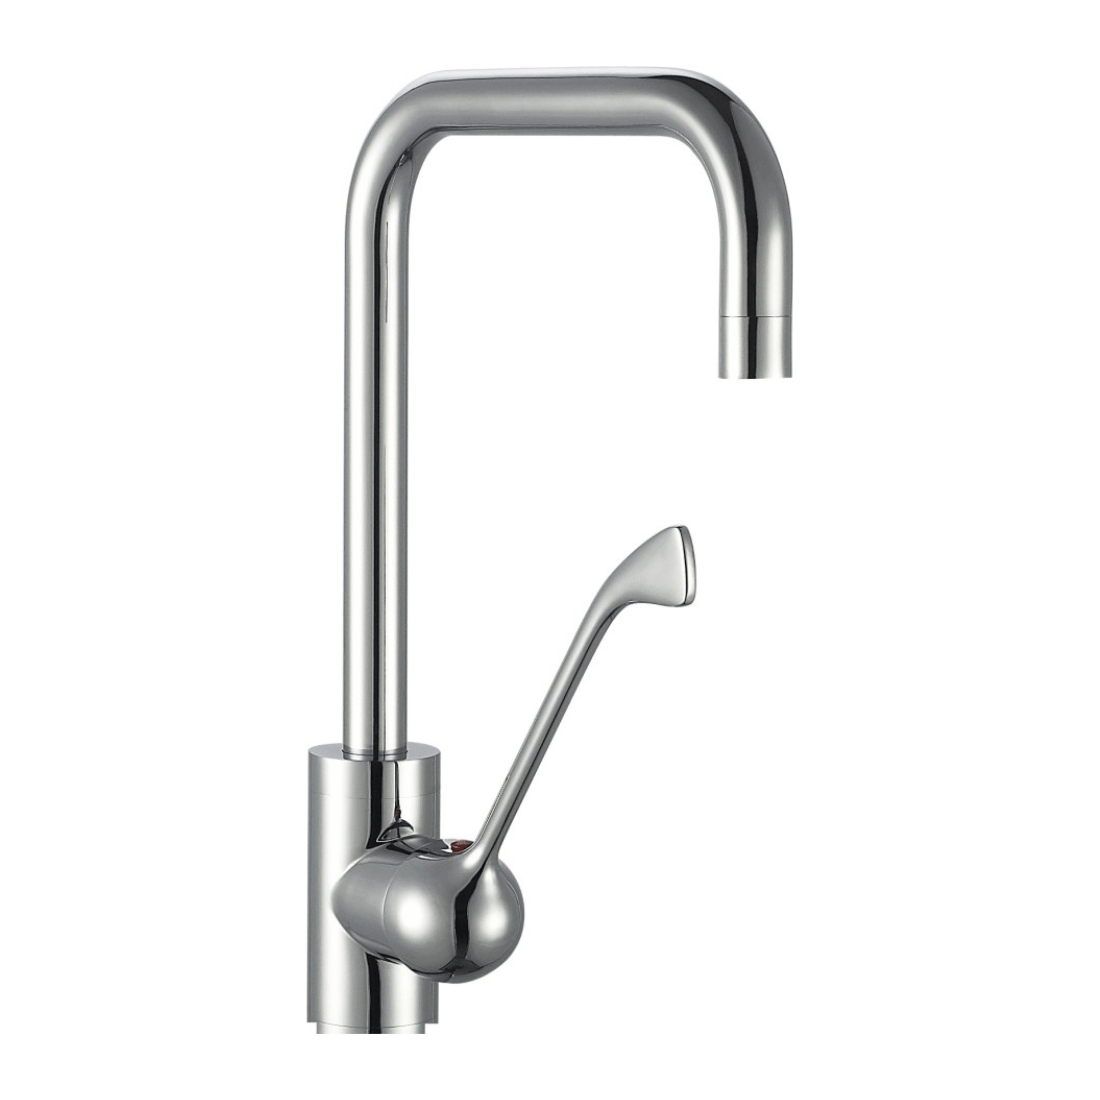 Sunmixer Deck Mounted Faucet with Wrist-Action Handle T20111